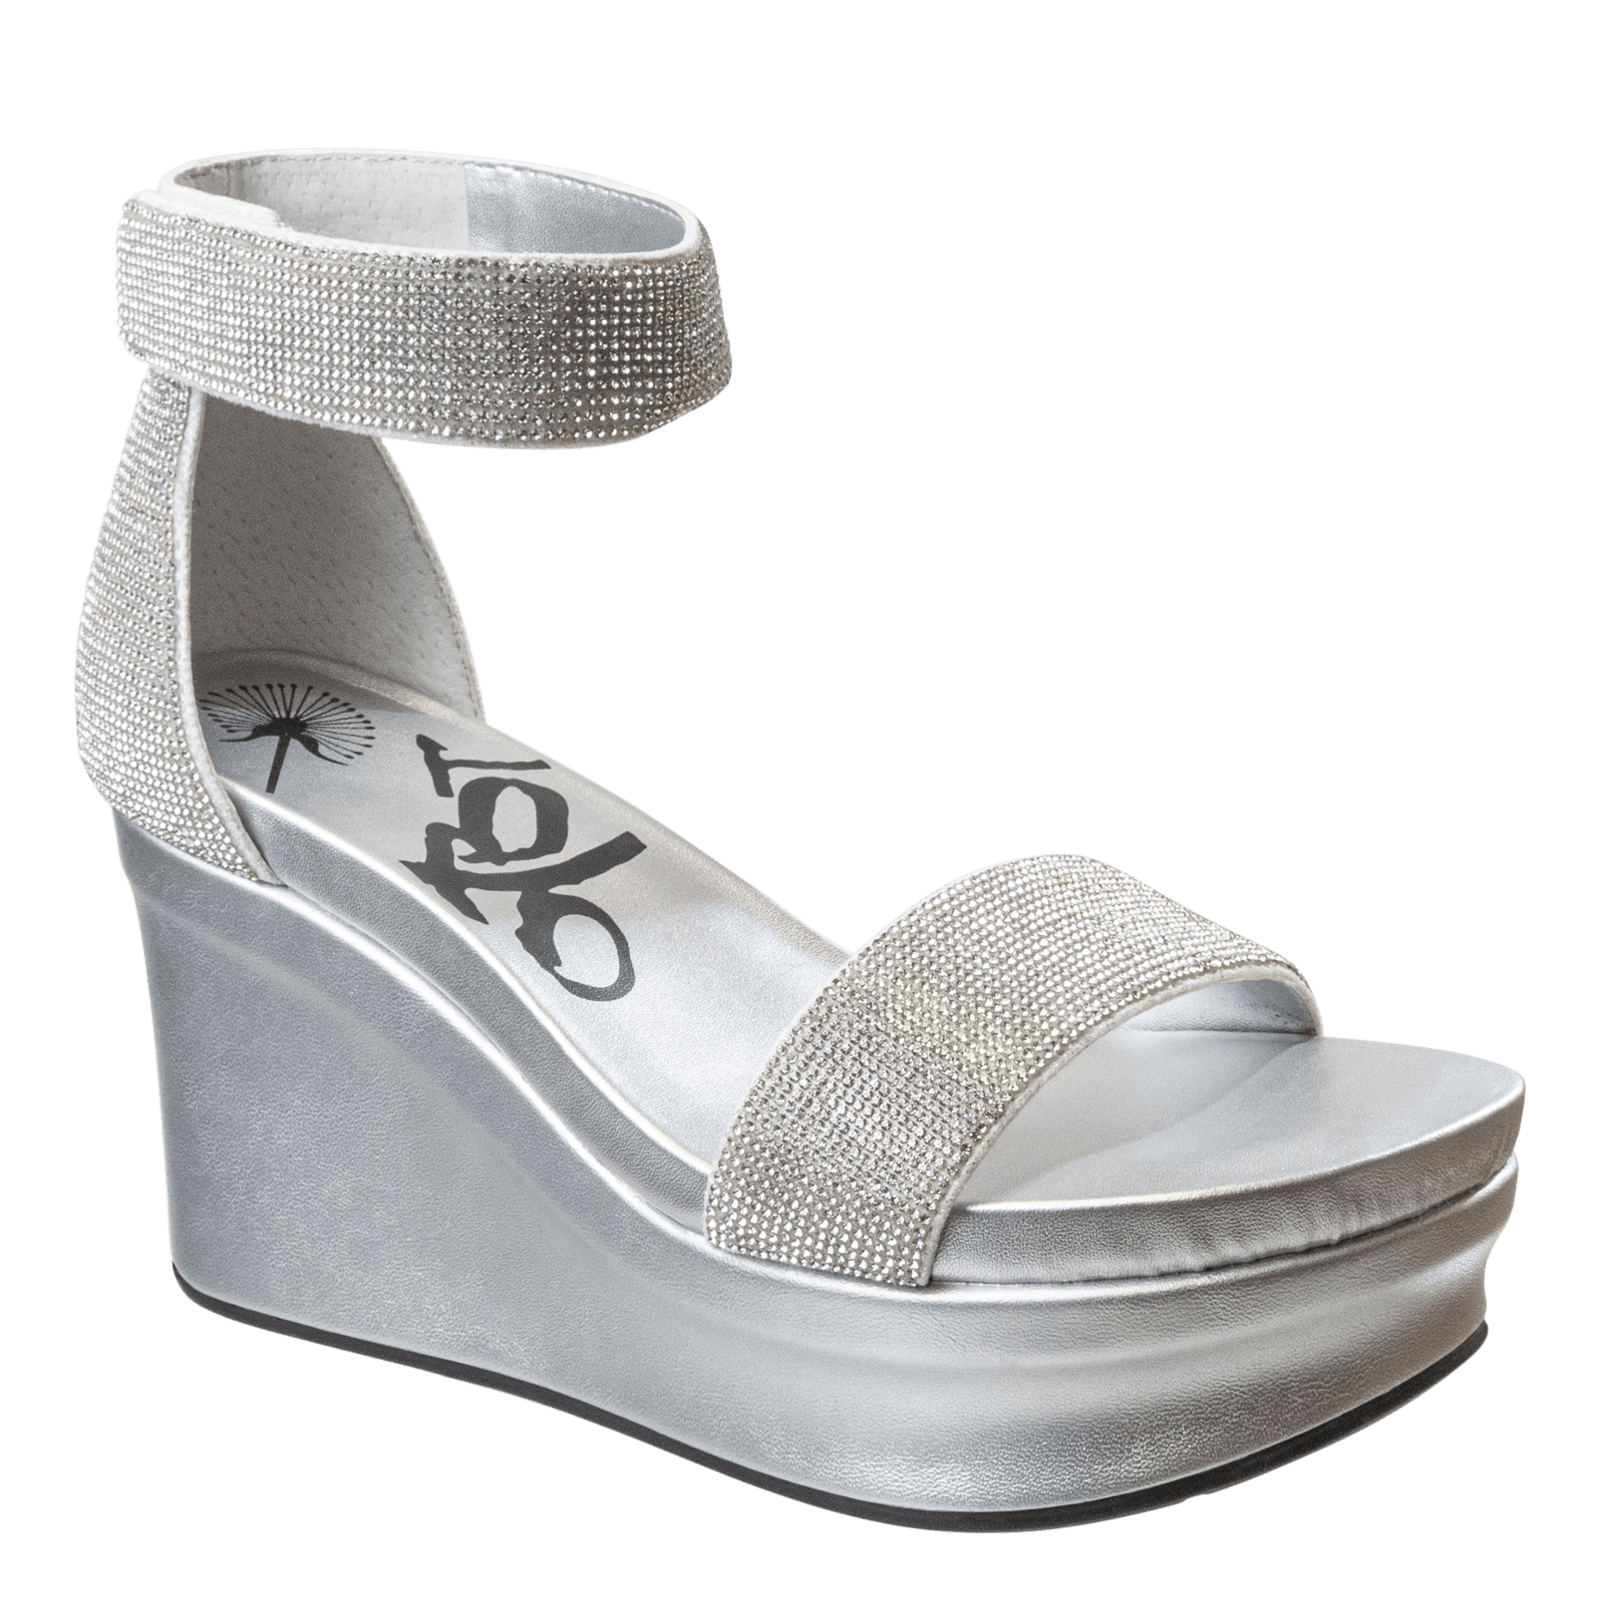 STATUS in SILVER Wedge Sandals